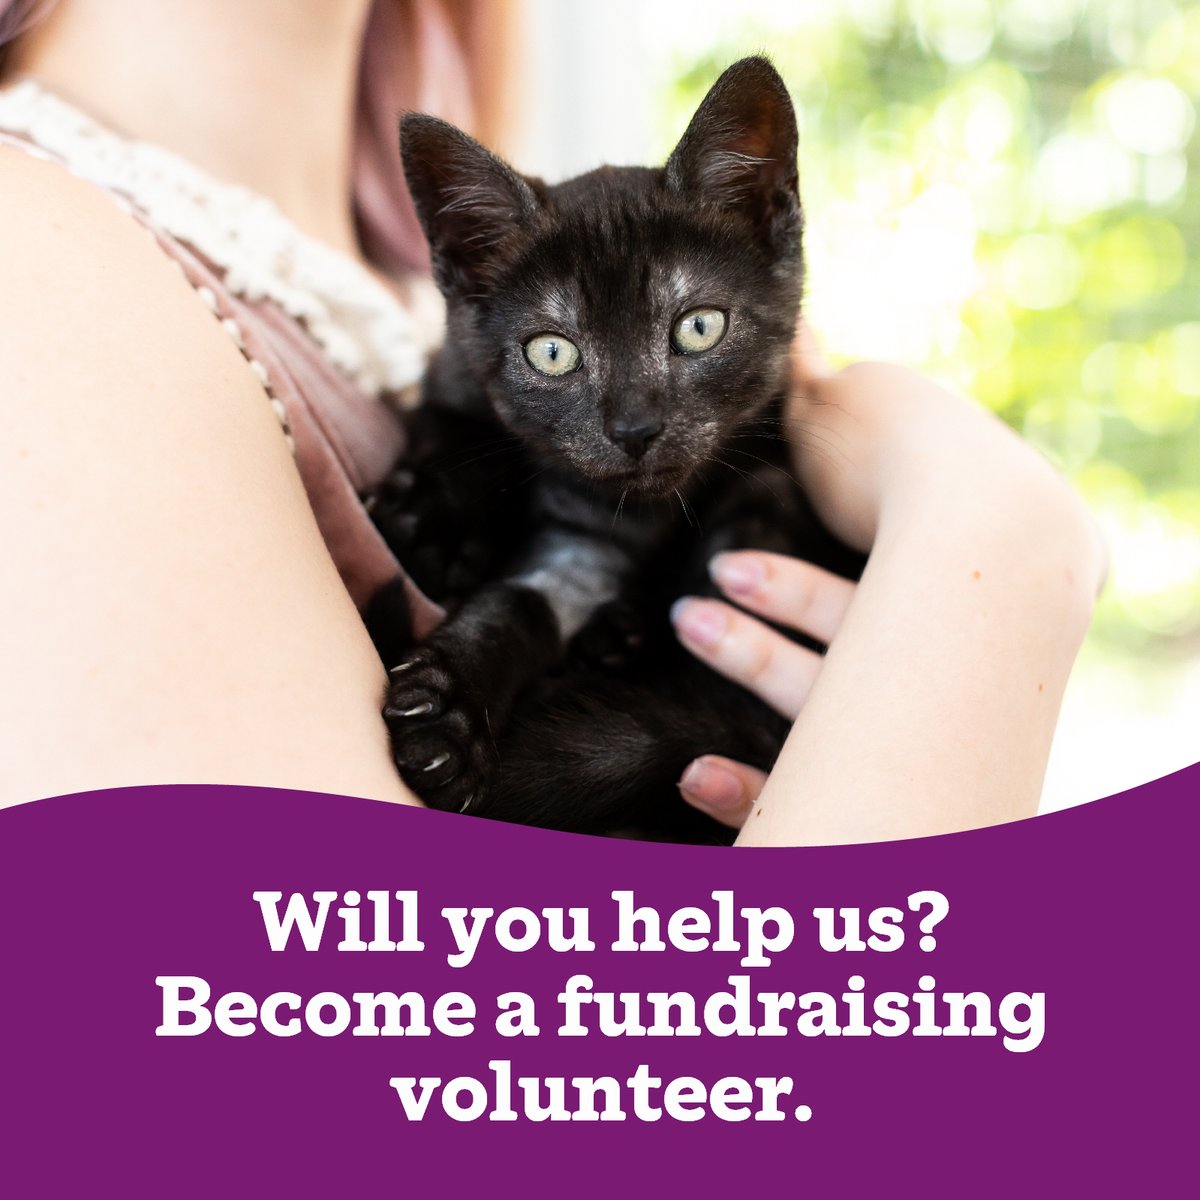 Today marks the start of Student Volunteering Week. We have been, for some time now, looking for a fundraising volunteer.  To find out more, and to apply, check out this link 👇⬇

cats.org.uk/support-us/vol…

#StudentVolunteeringWeek #CatsOfTwitter